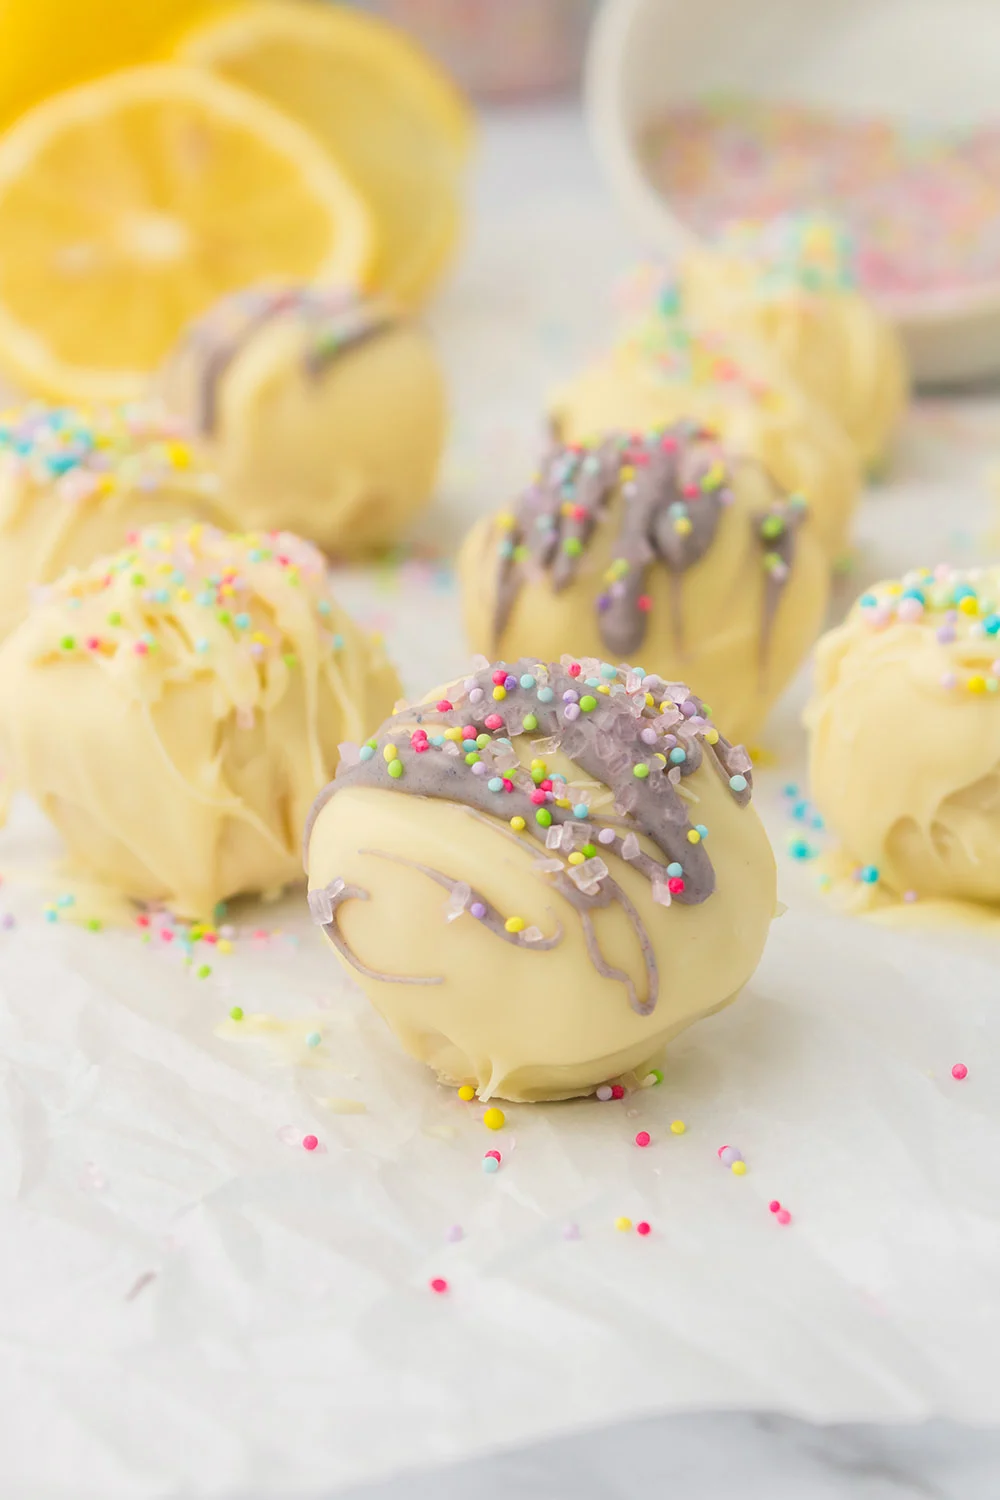 Lemon truffles with purple and yellow topping and sprinkles.